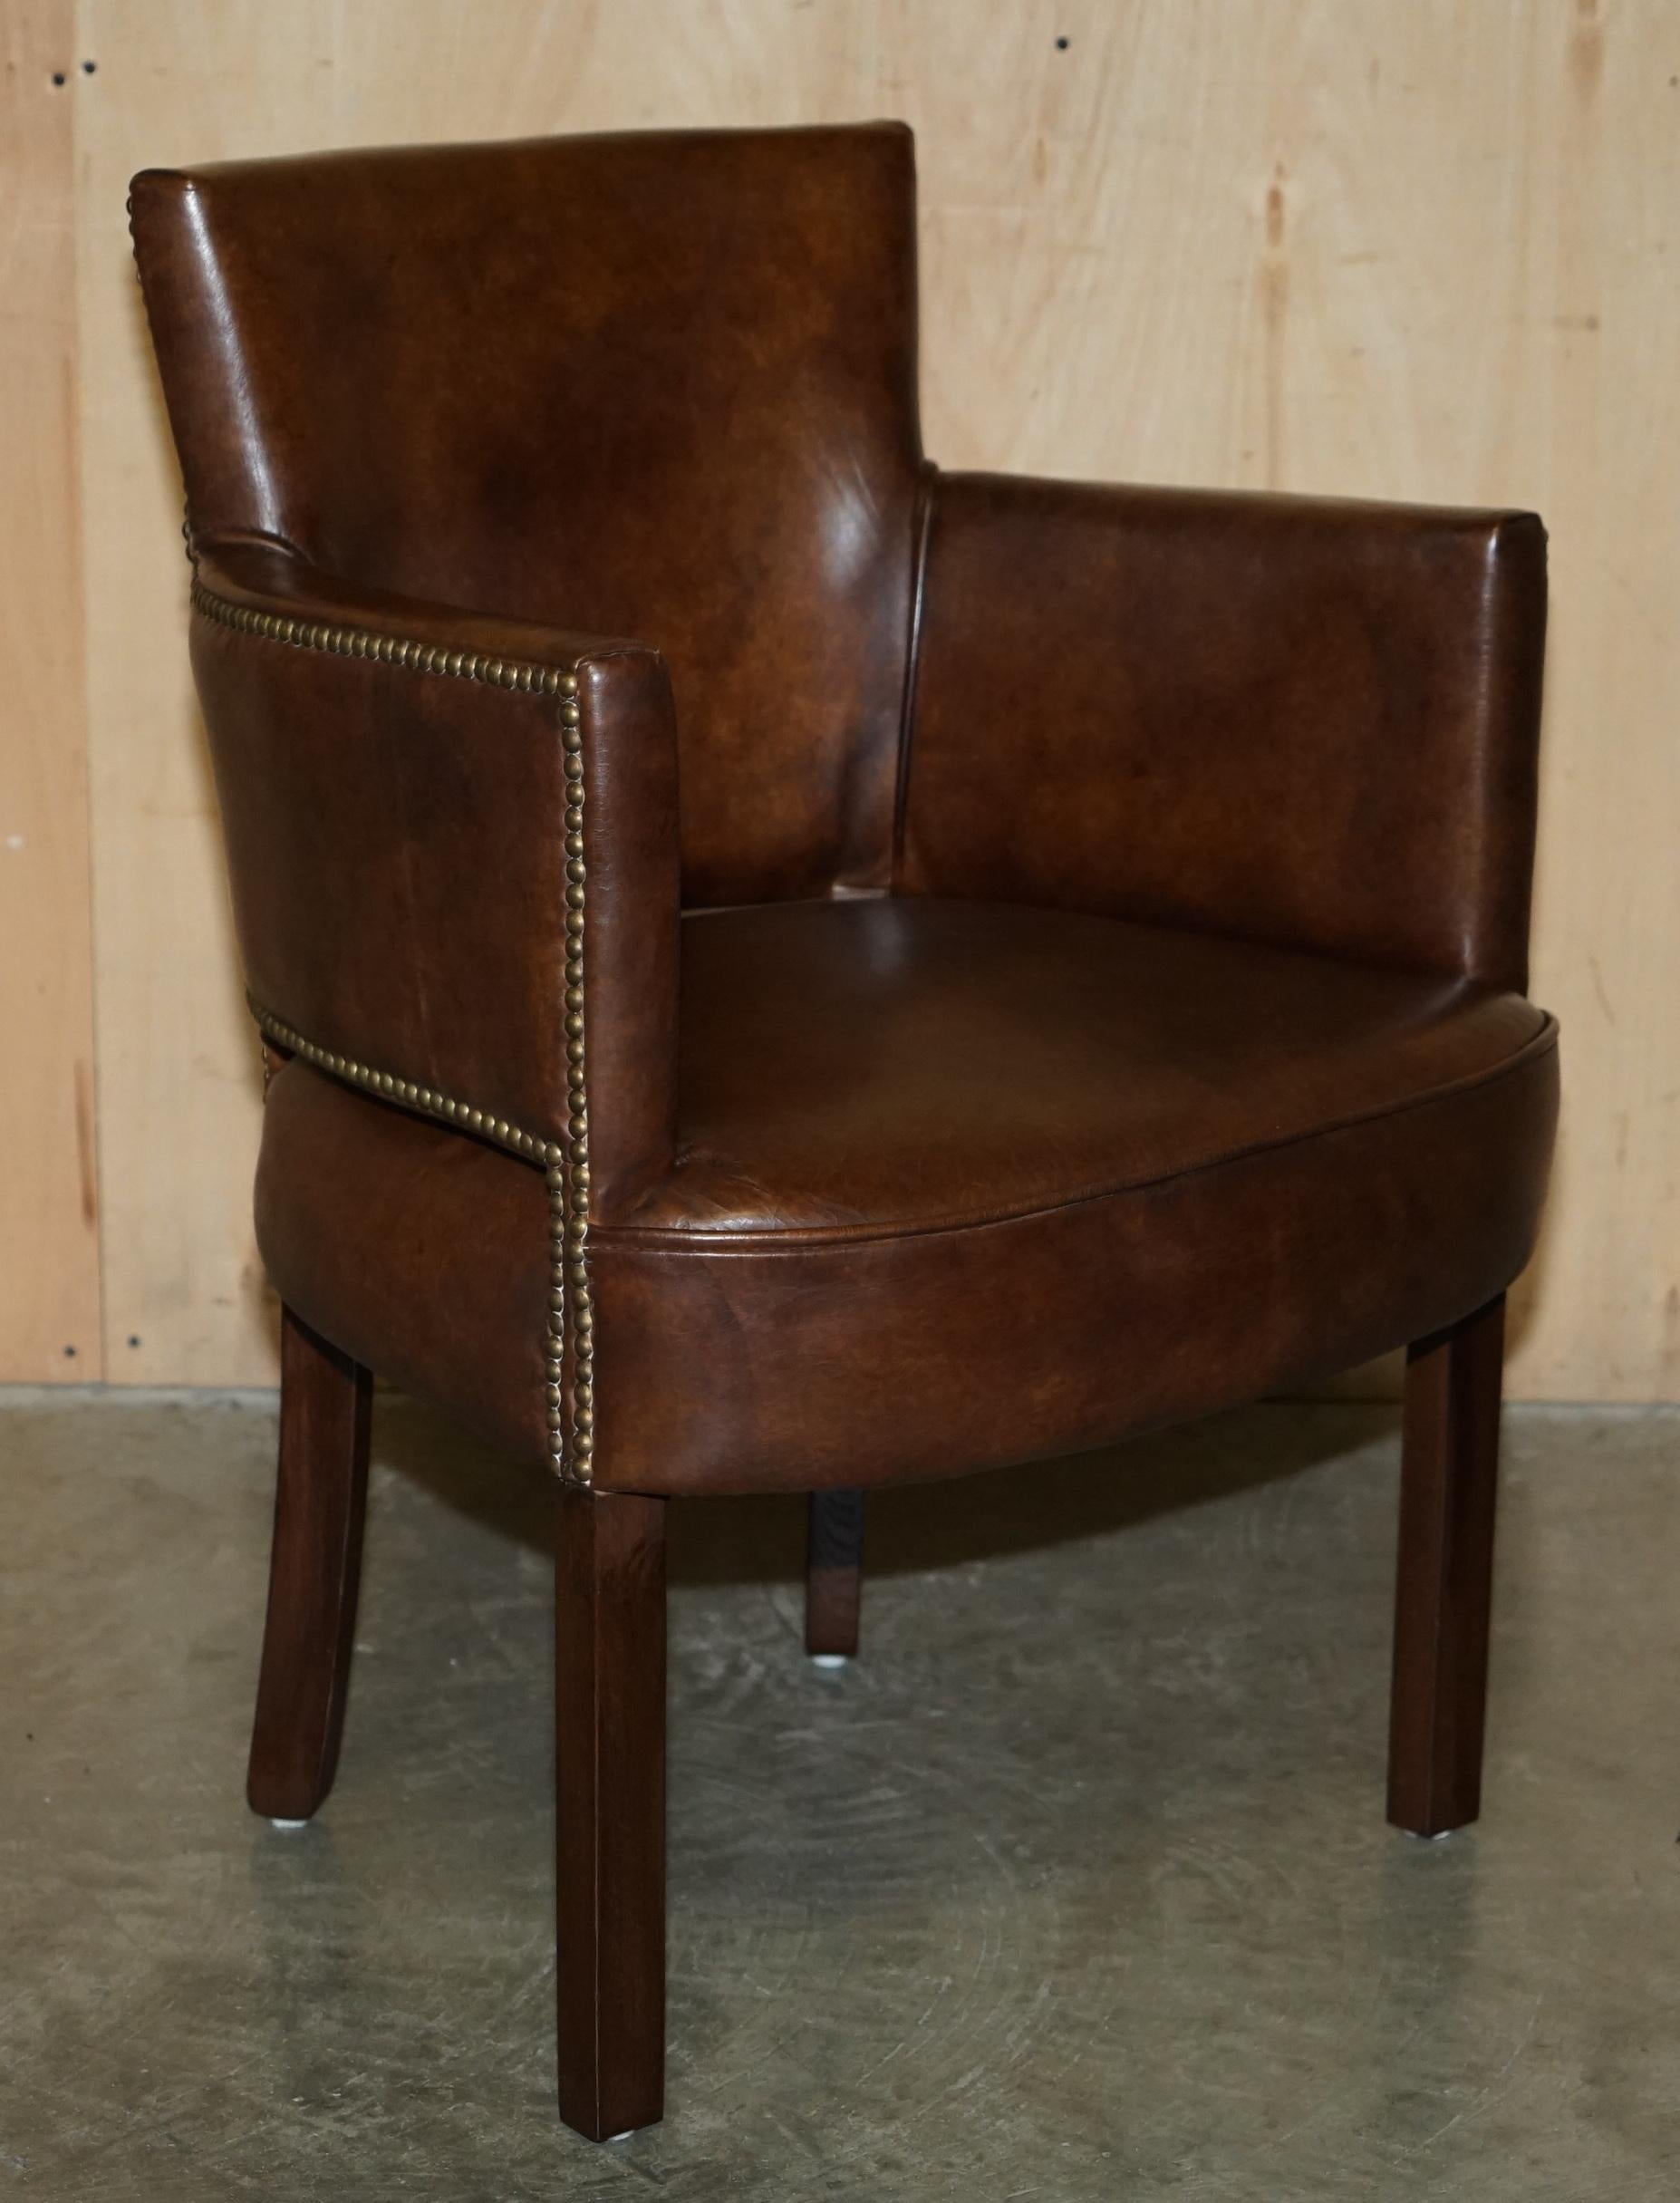 Royal House Antiques

Royal House Antiques is delighted to offer for sale this stunning pair of vintage Halo Heritage brown leather tub armchairs which can be used as occasional chairs or dining chairs 

Please note the delivery fee listed is just a